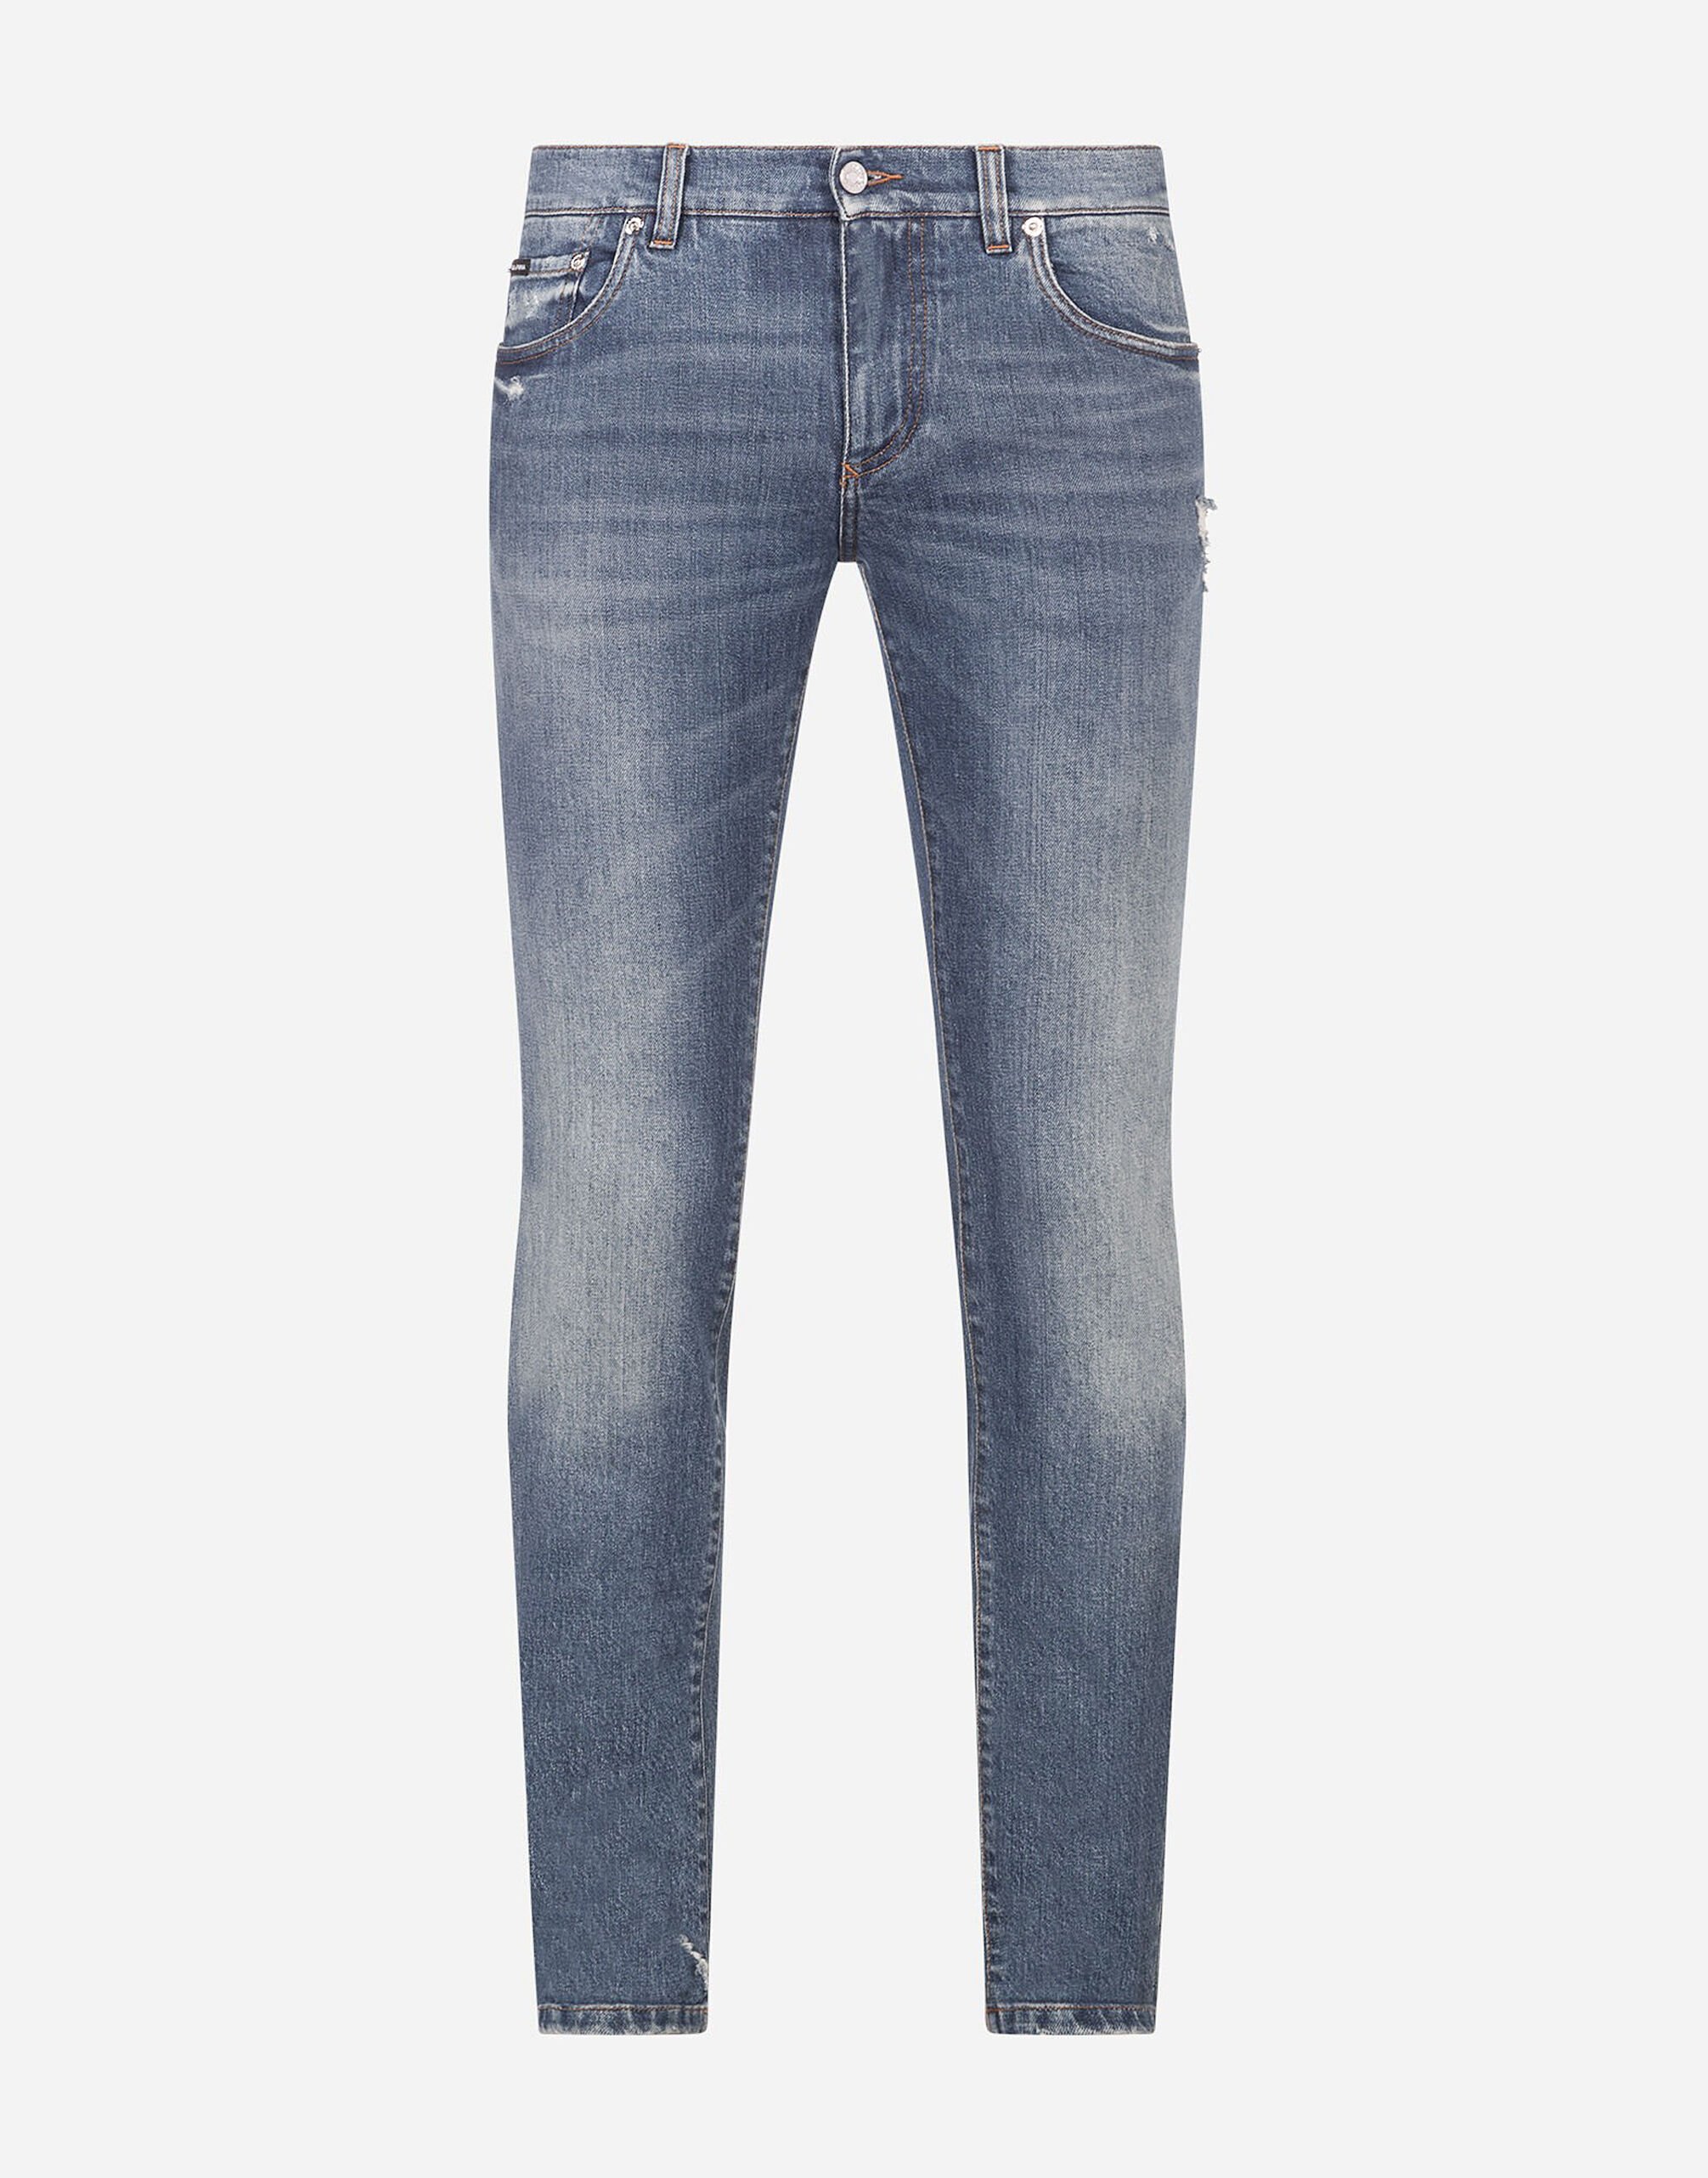 Dolce&Gabbana Stretch skinny jeans with small abrasions Multicolor GY07LDG8JT3